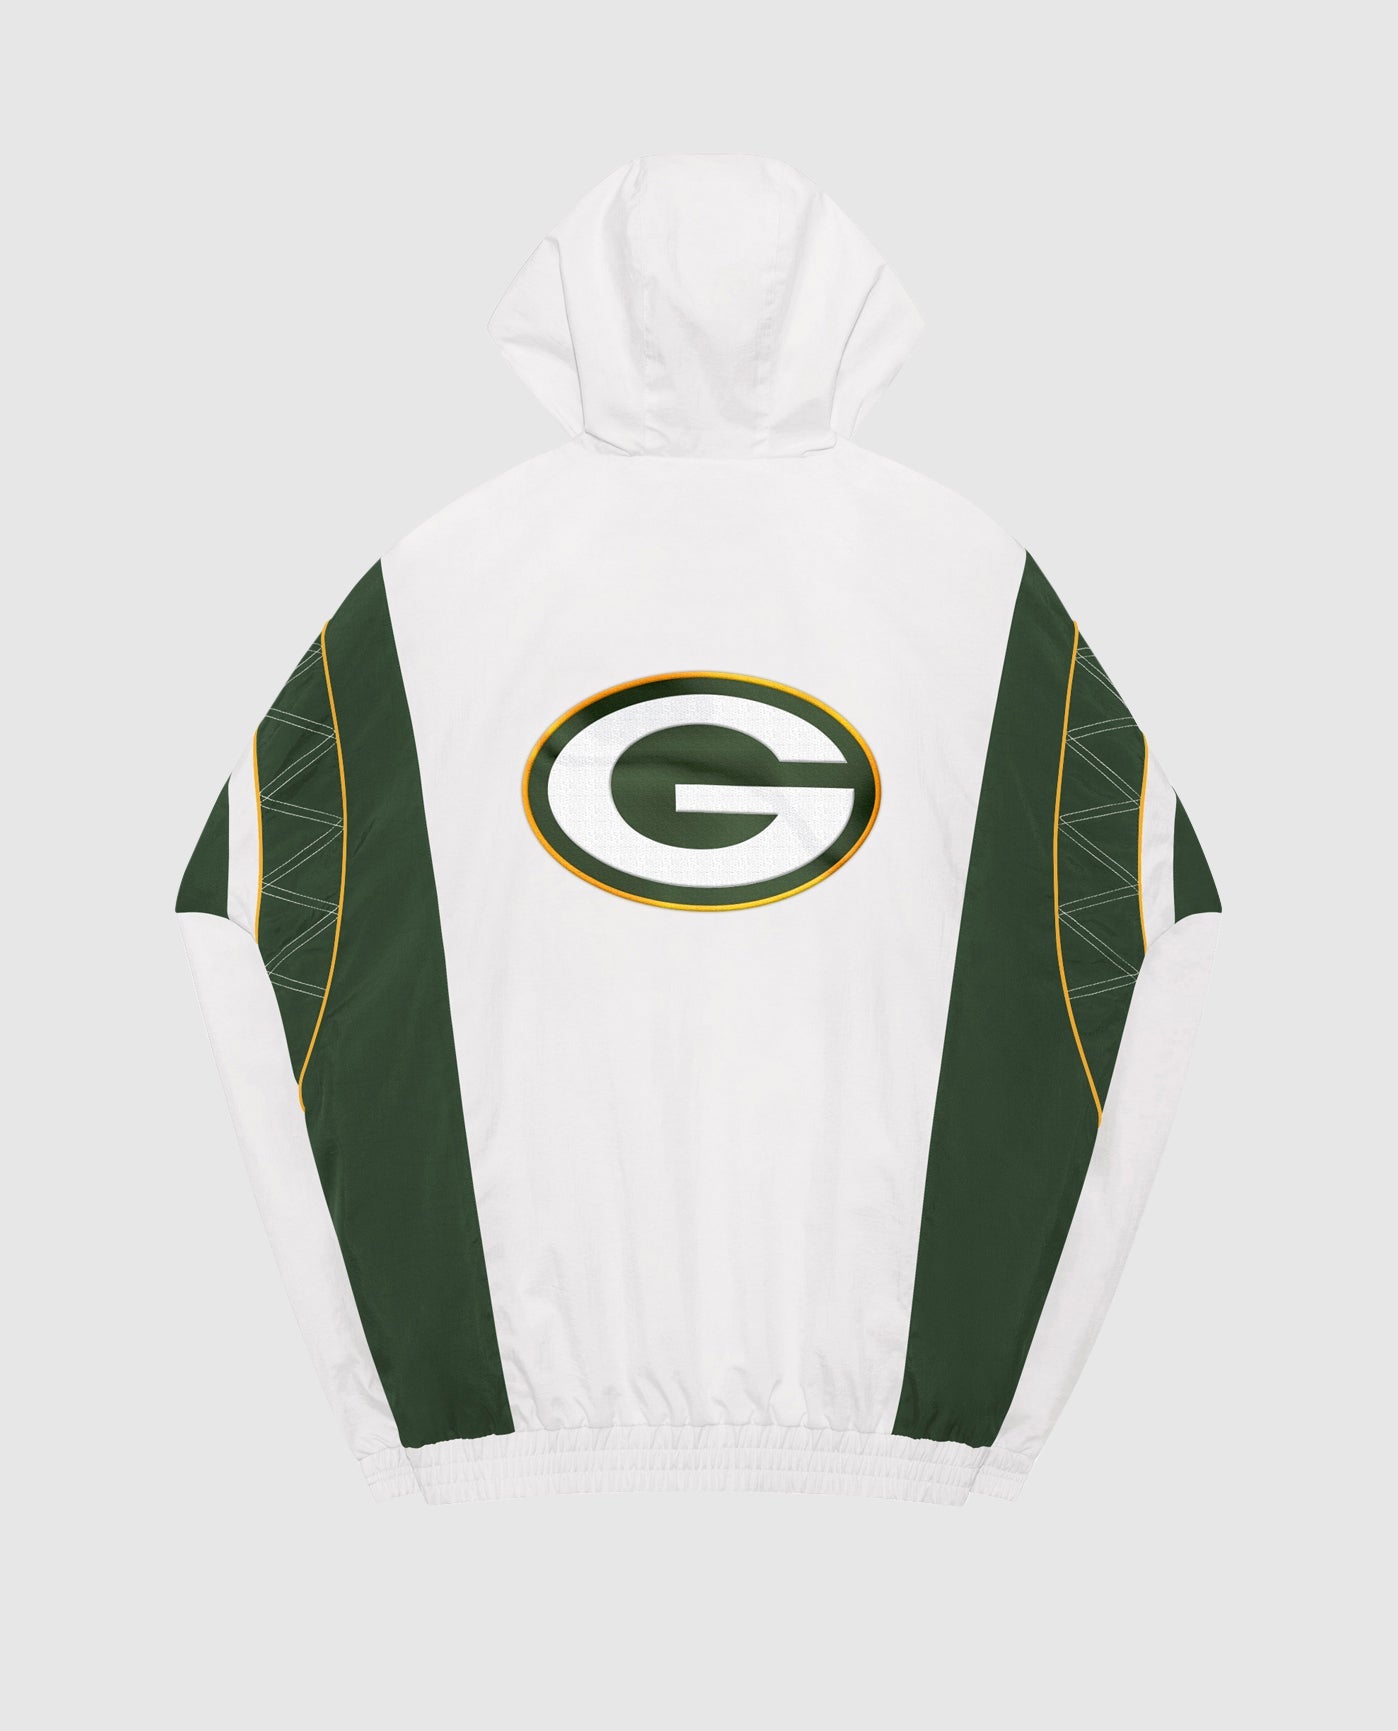 packers winter jacket